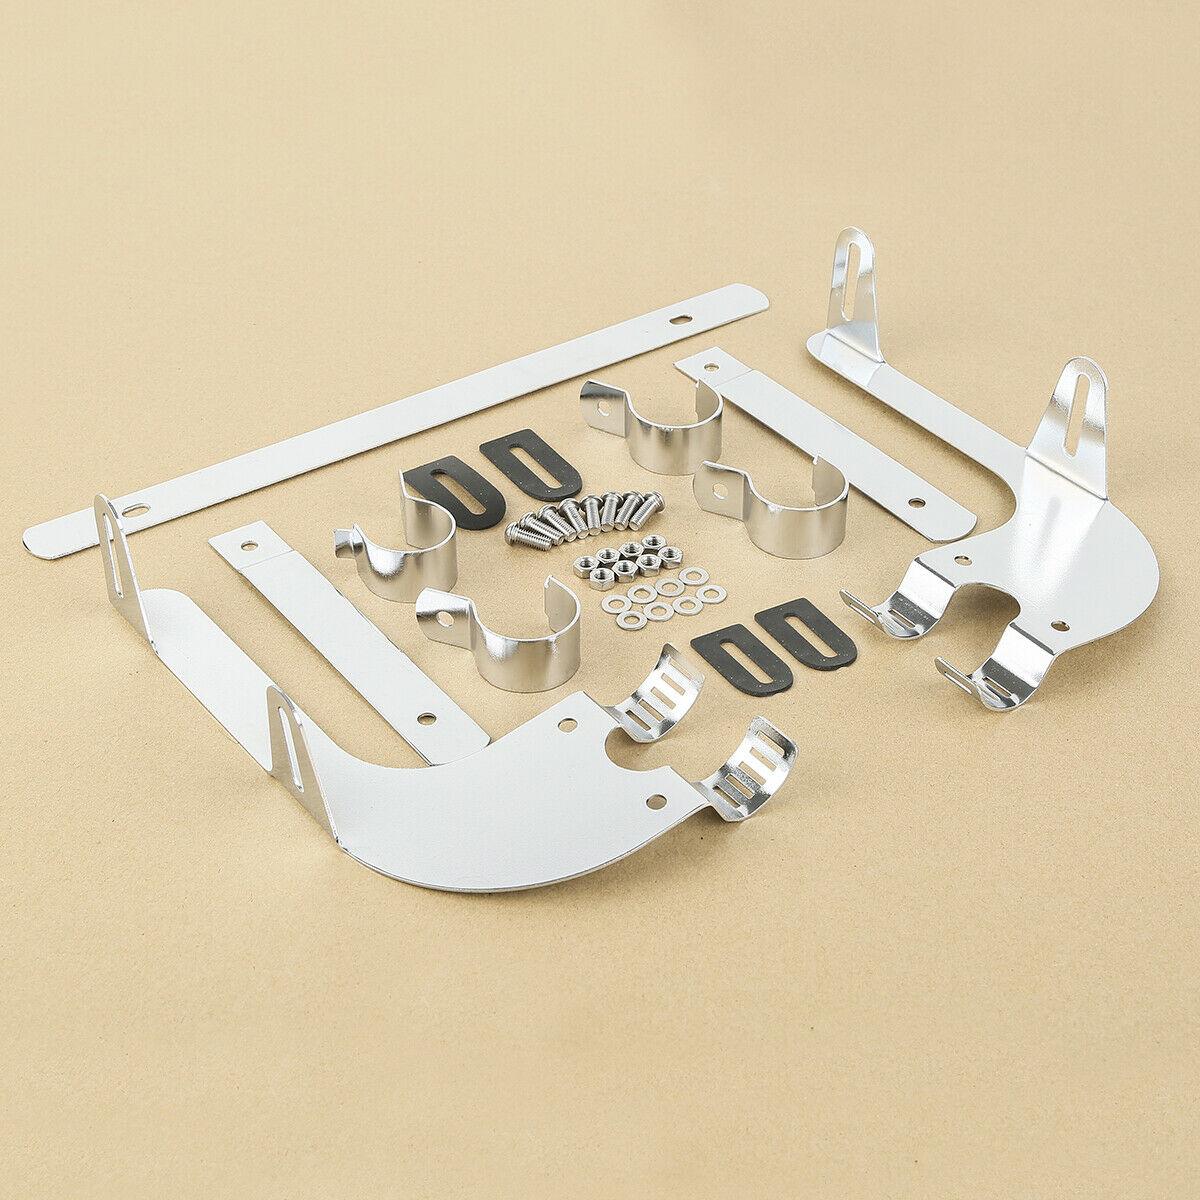 39mm Windshield Screen Bracket Fit For Harley Dyna Sportster XL 883 1200 Chrome - Moto Life Products